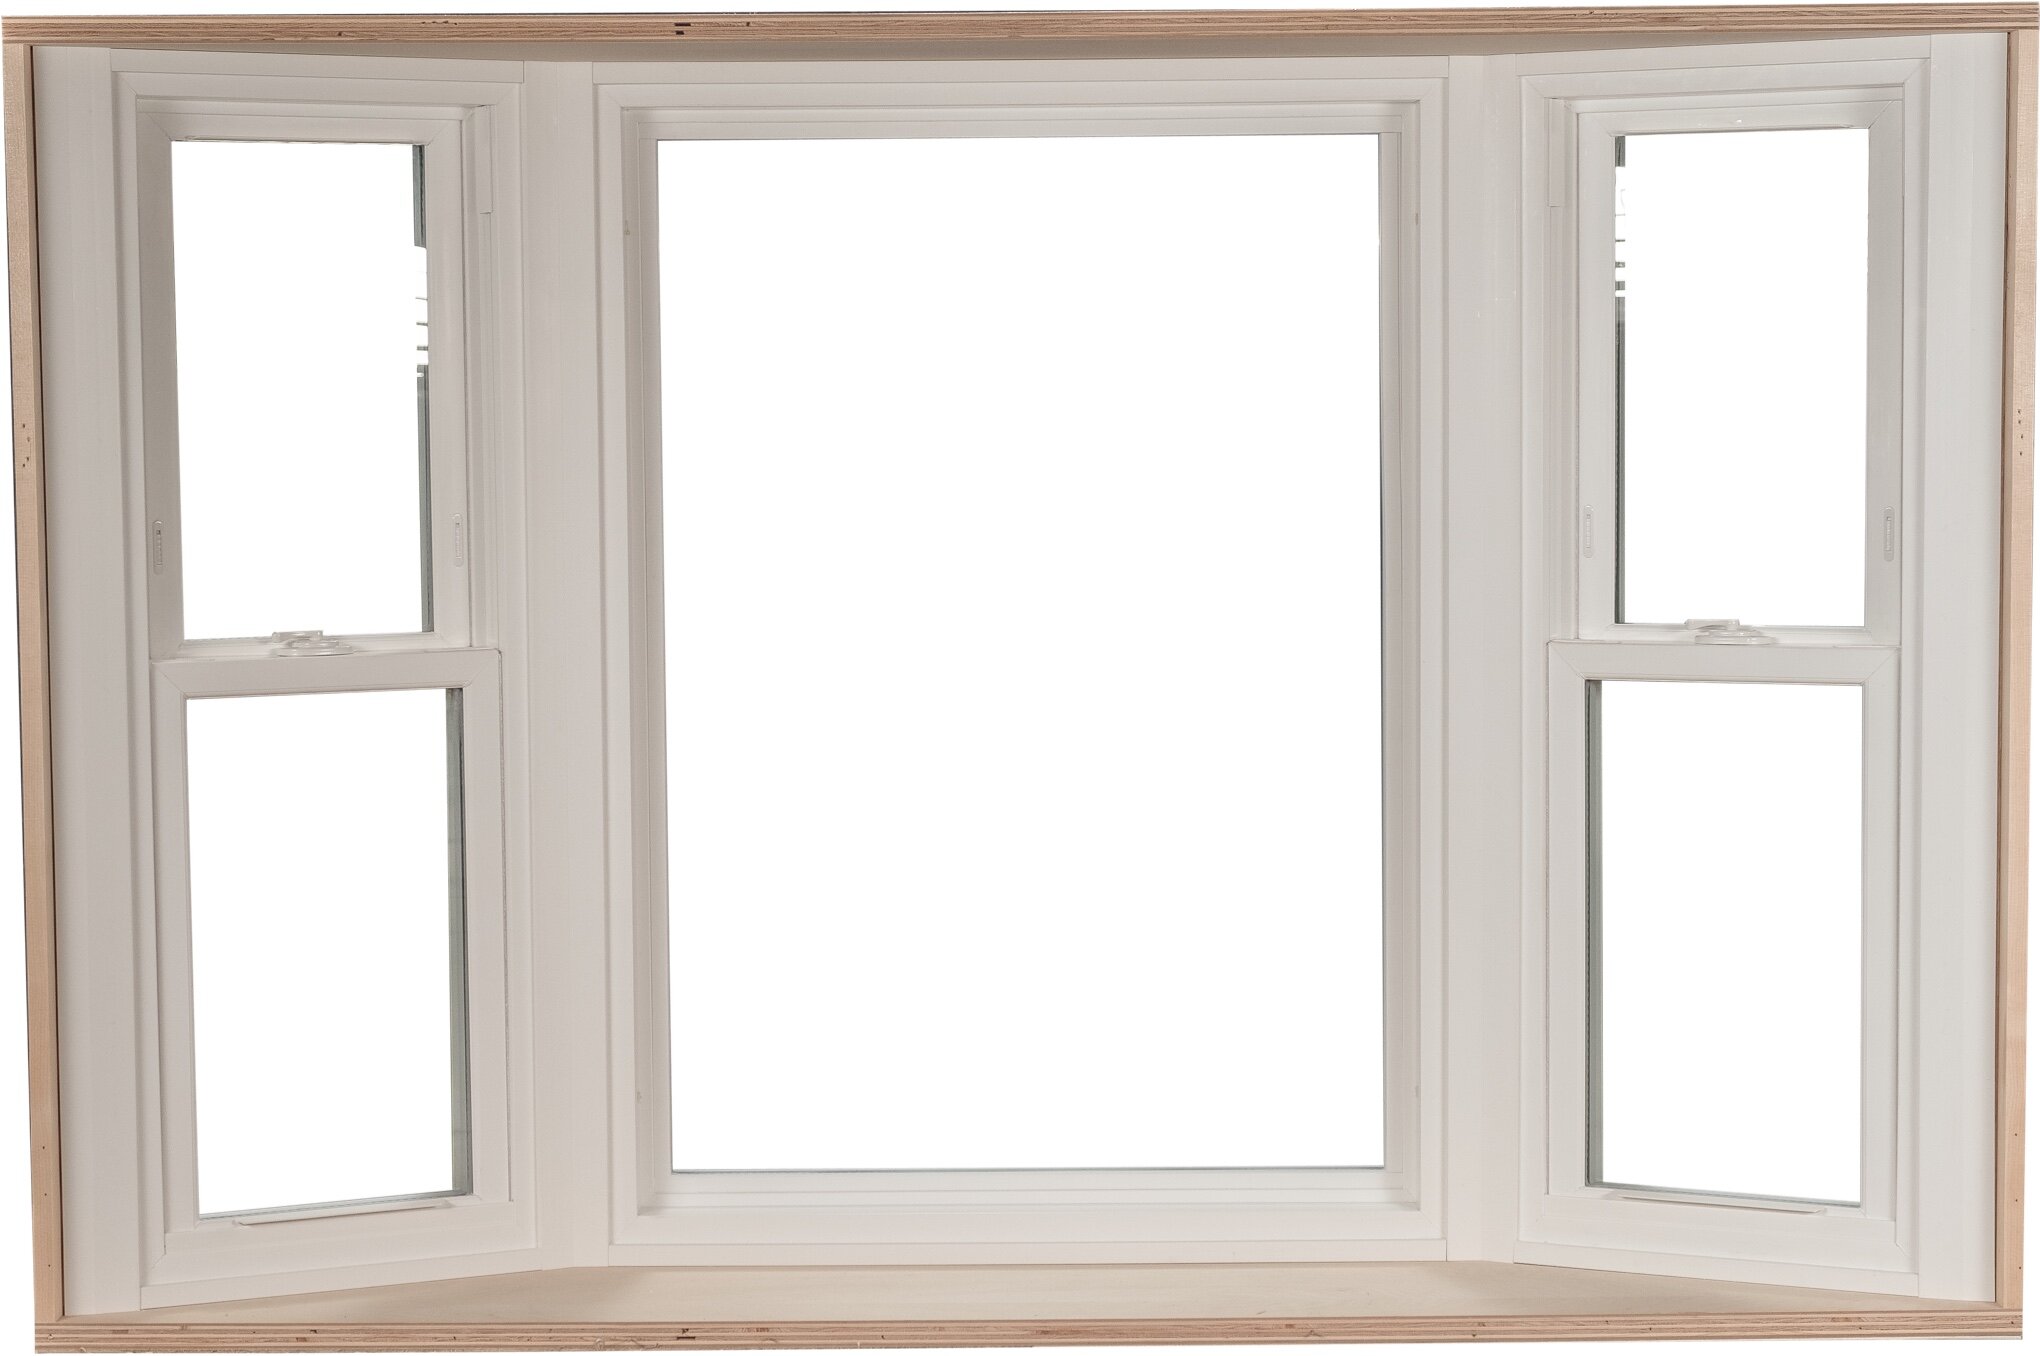 Mercury Excelum's exterior bay windows, with vinyl exterior capping and insulated seat board.